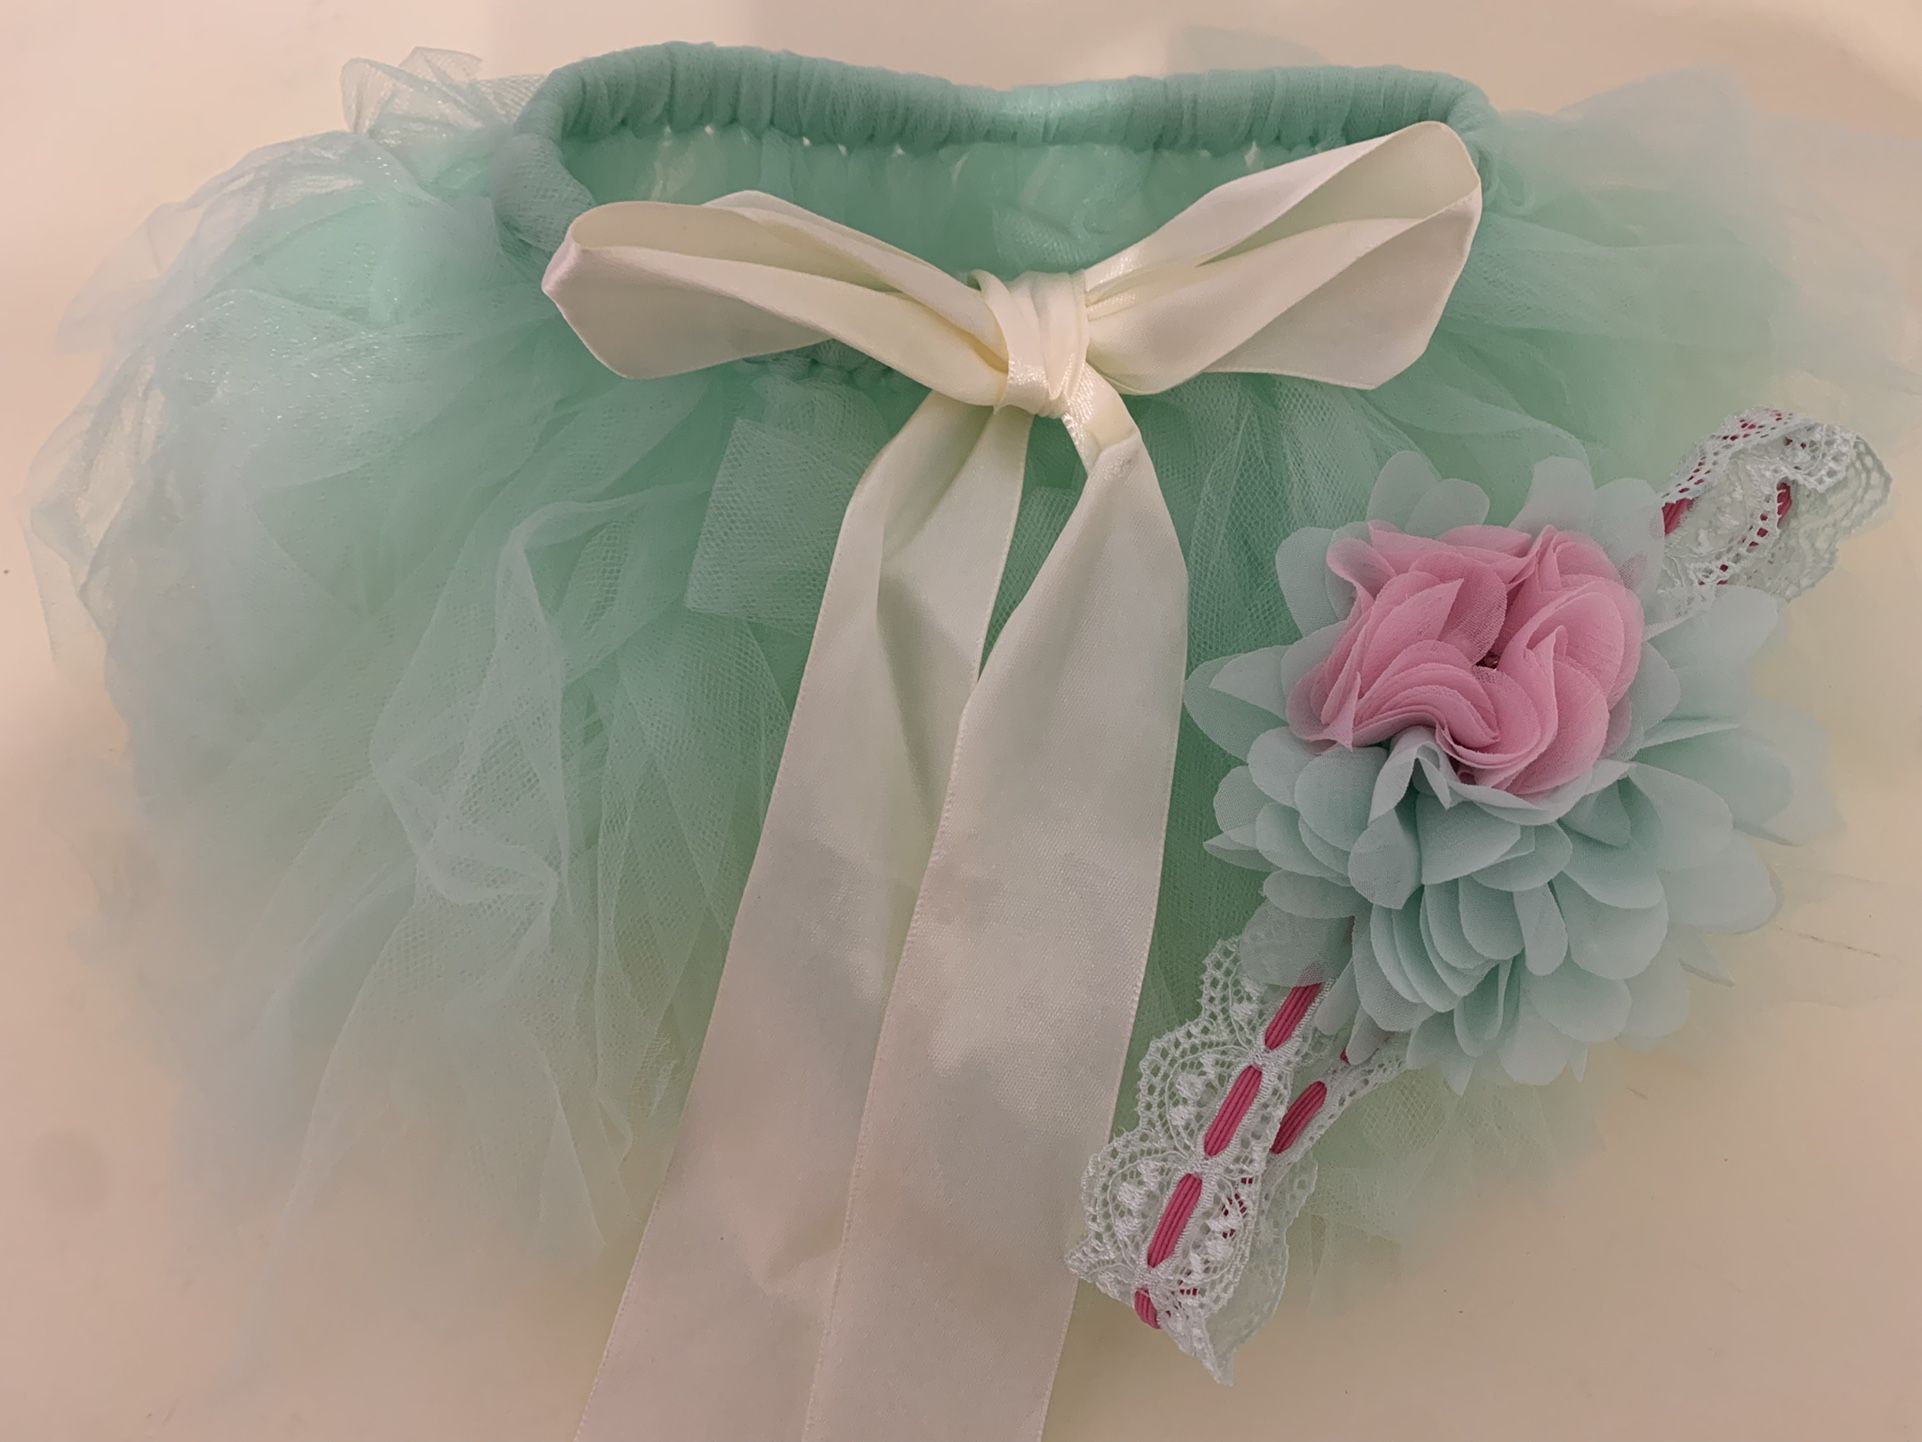 Baby 3+ Month Tutu Outfit Skirt